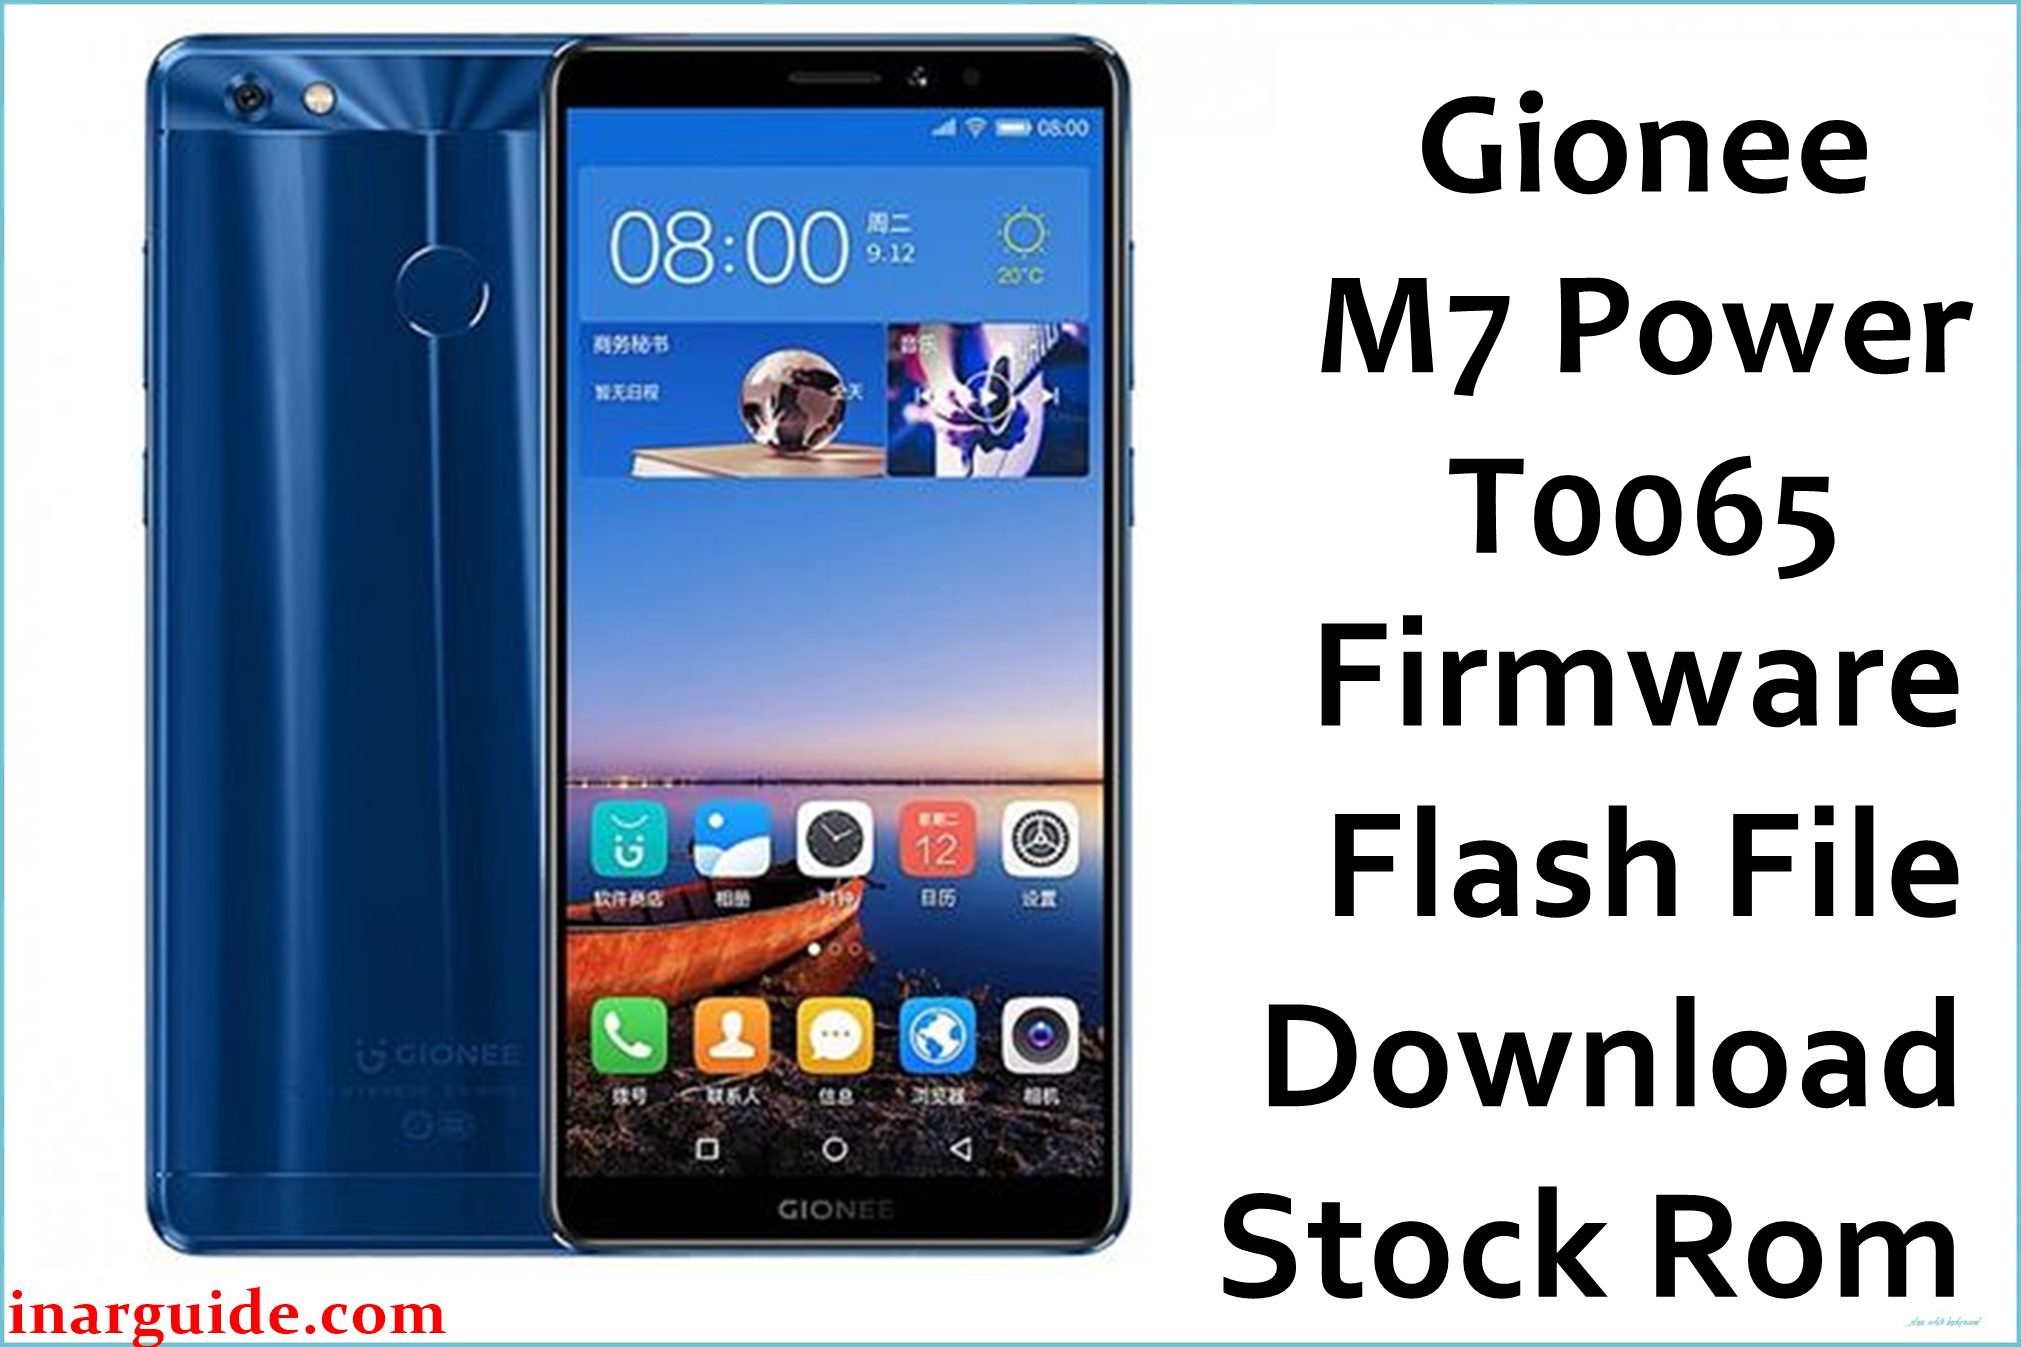 Gionee M7 Power T0065